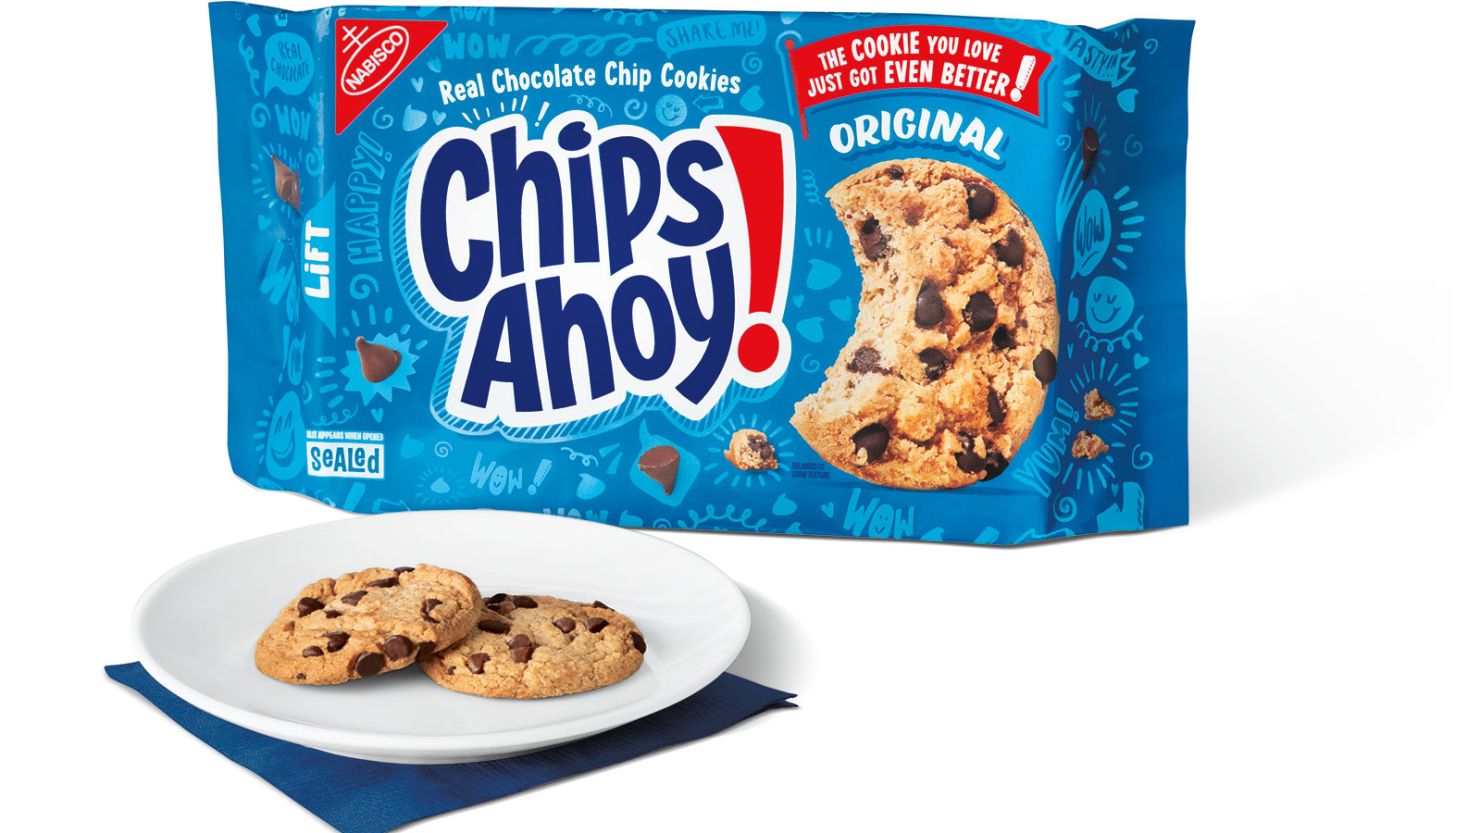 Chips Ahoy!, a 60-year-old cookie brand, is unveiling a new recipe for its original chocolate chip cookie.